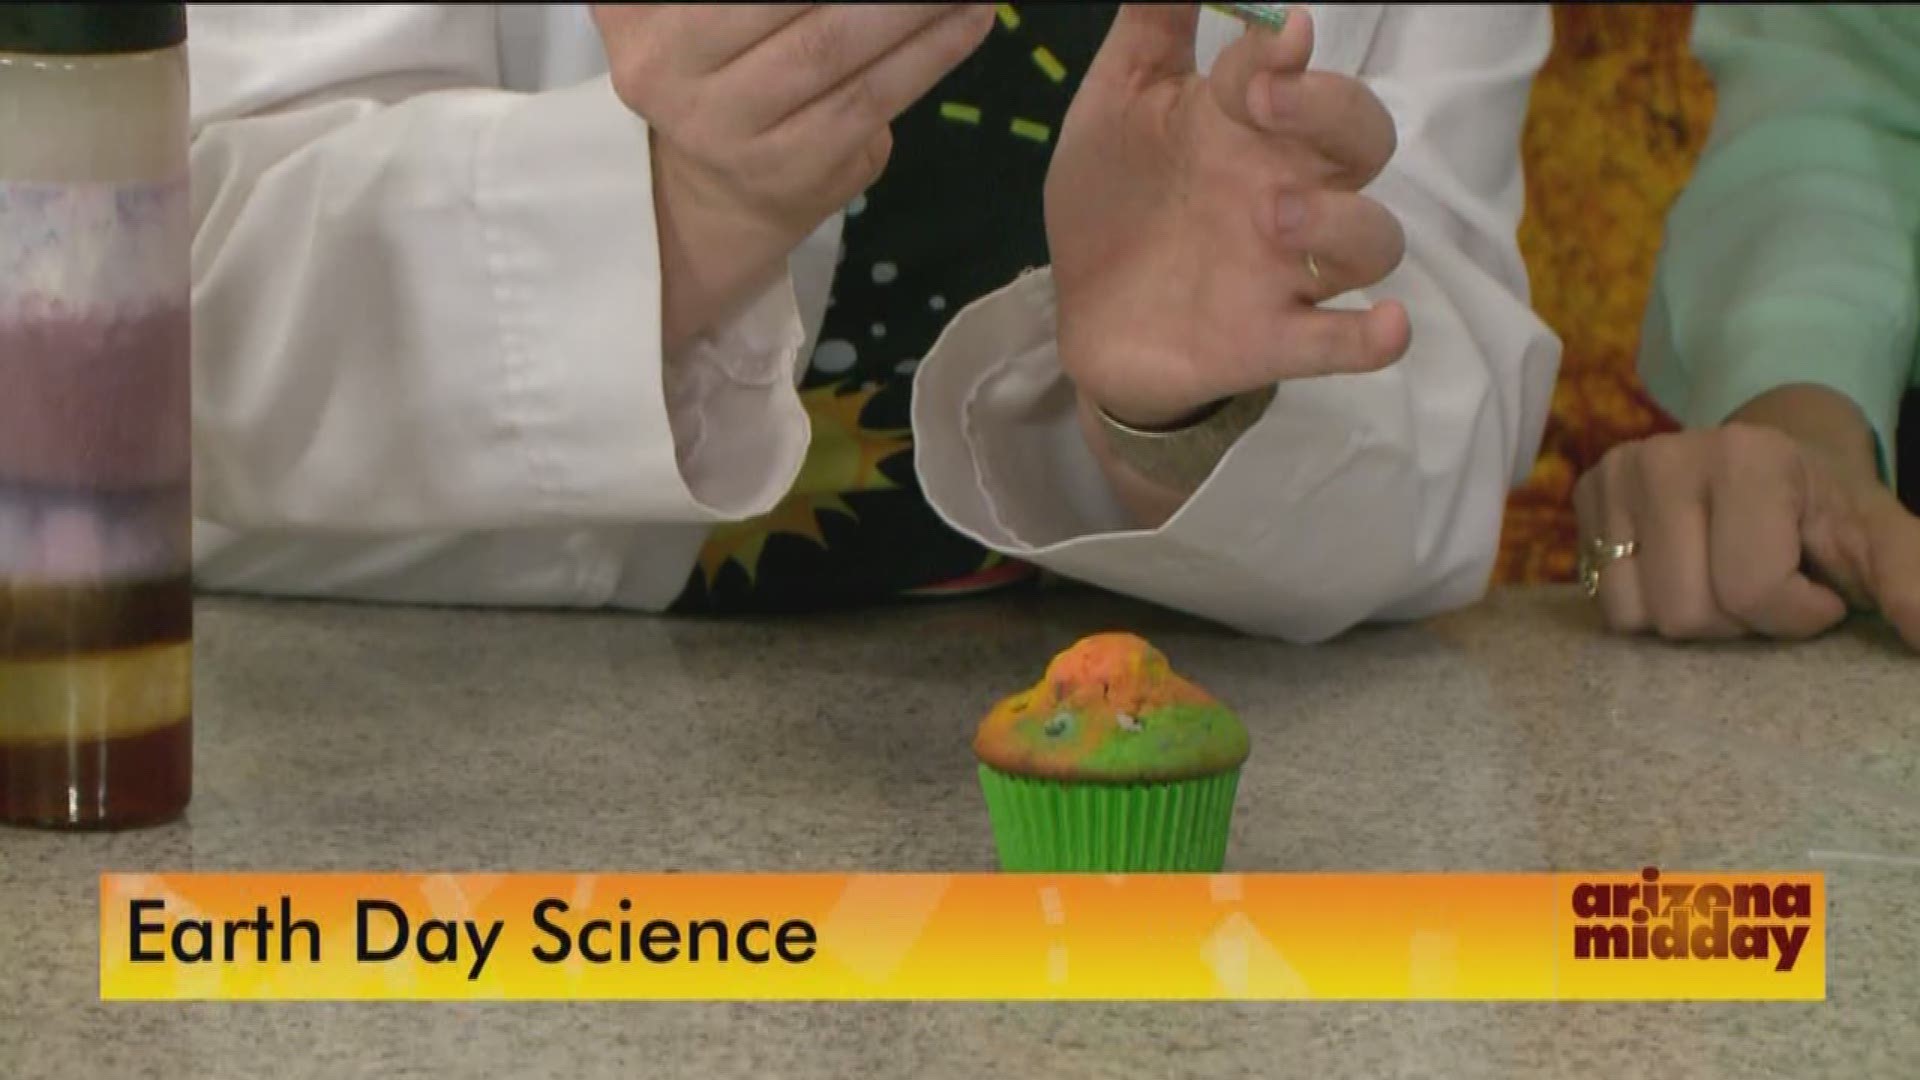 The Scientific mom Amy Oyler and her daughter Katie teach us about Earth Day using fun experiments with sweet treats.